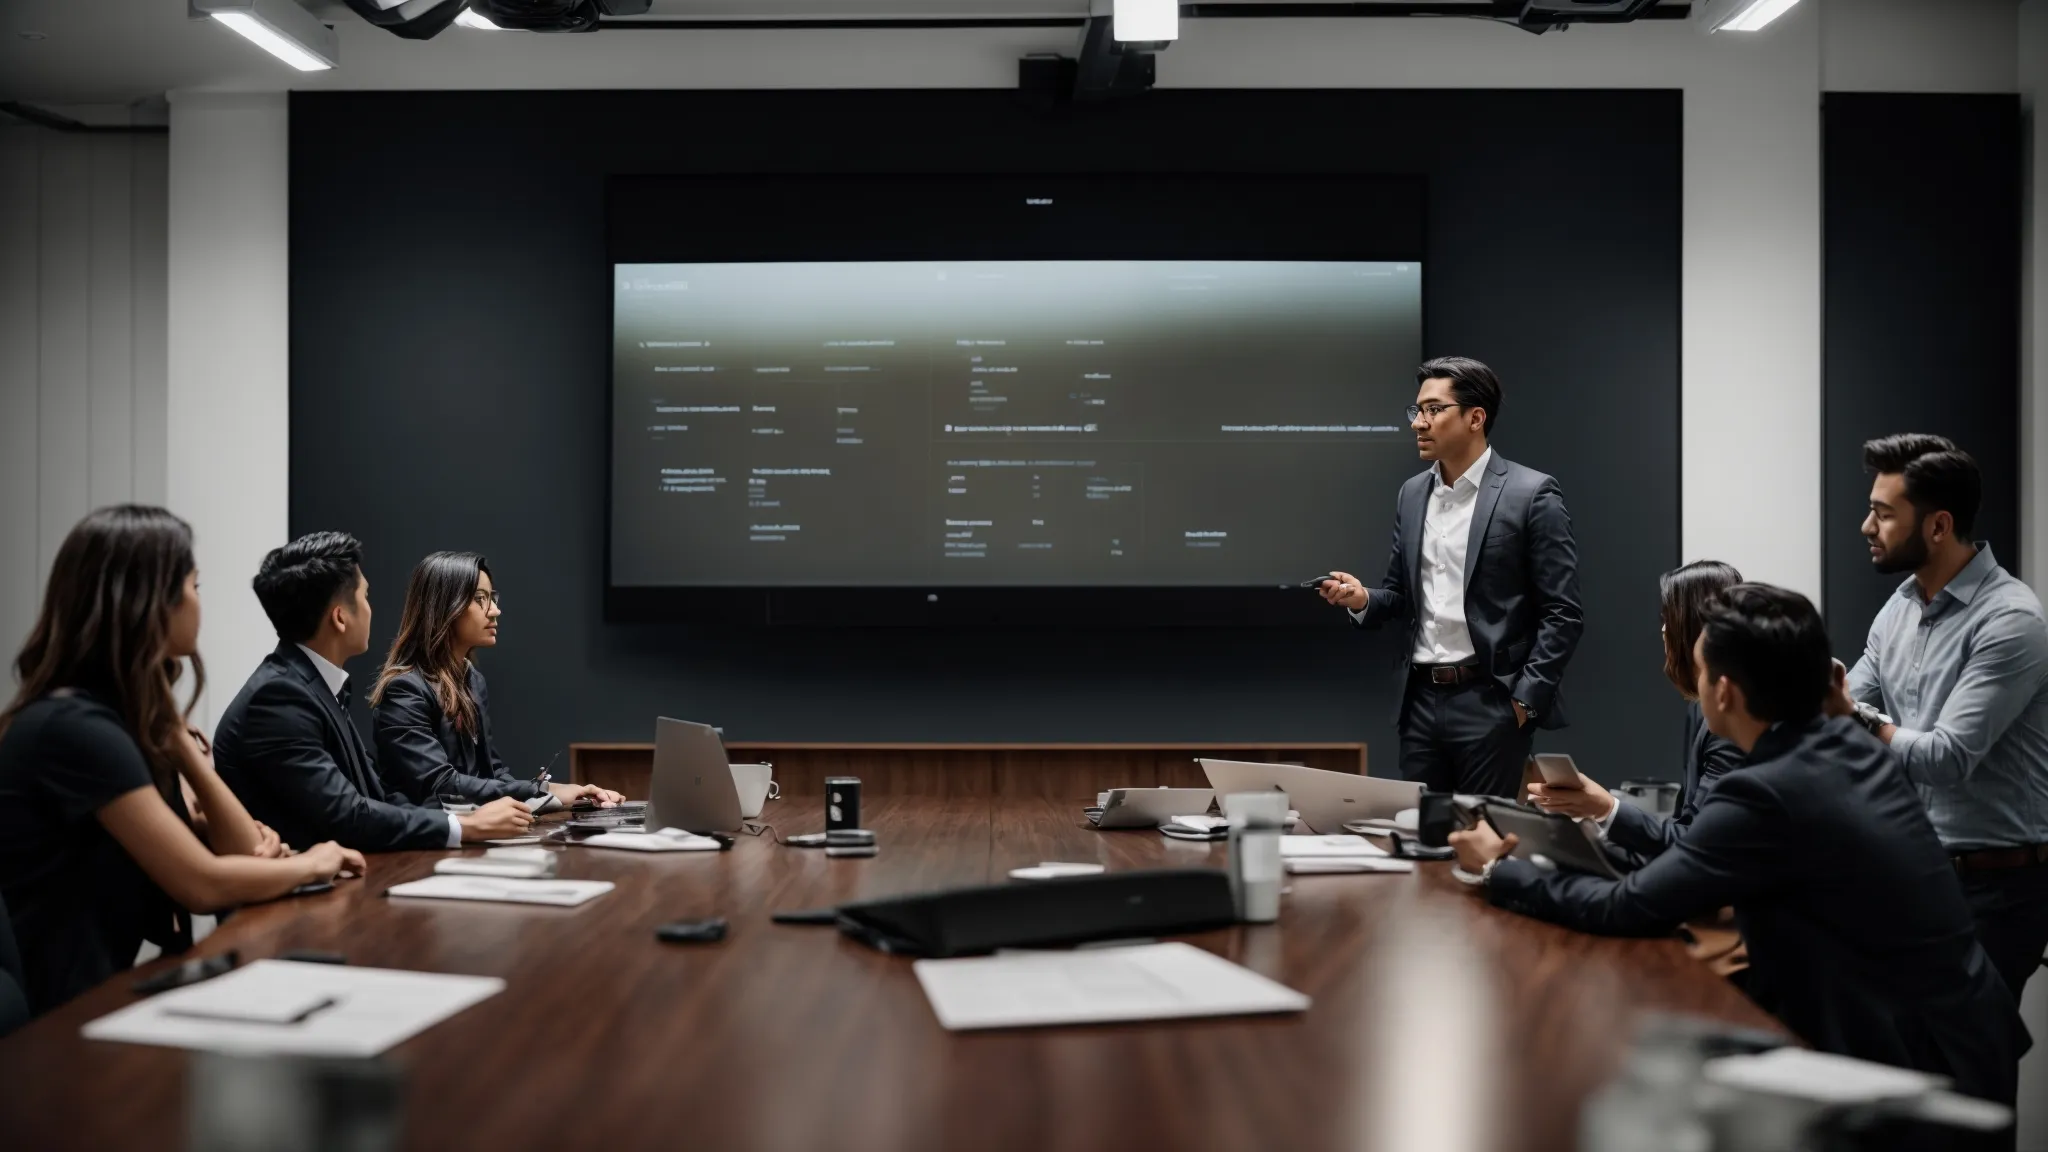 a digital marketing expert presenting an seo strategy to a team of professionals around a conference table using a laptop and projector screen.